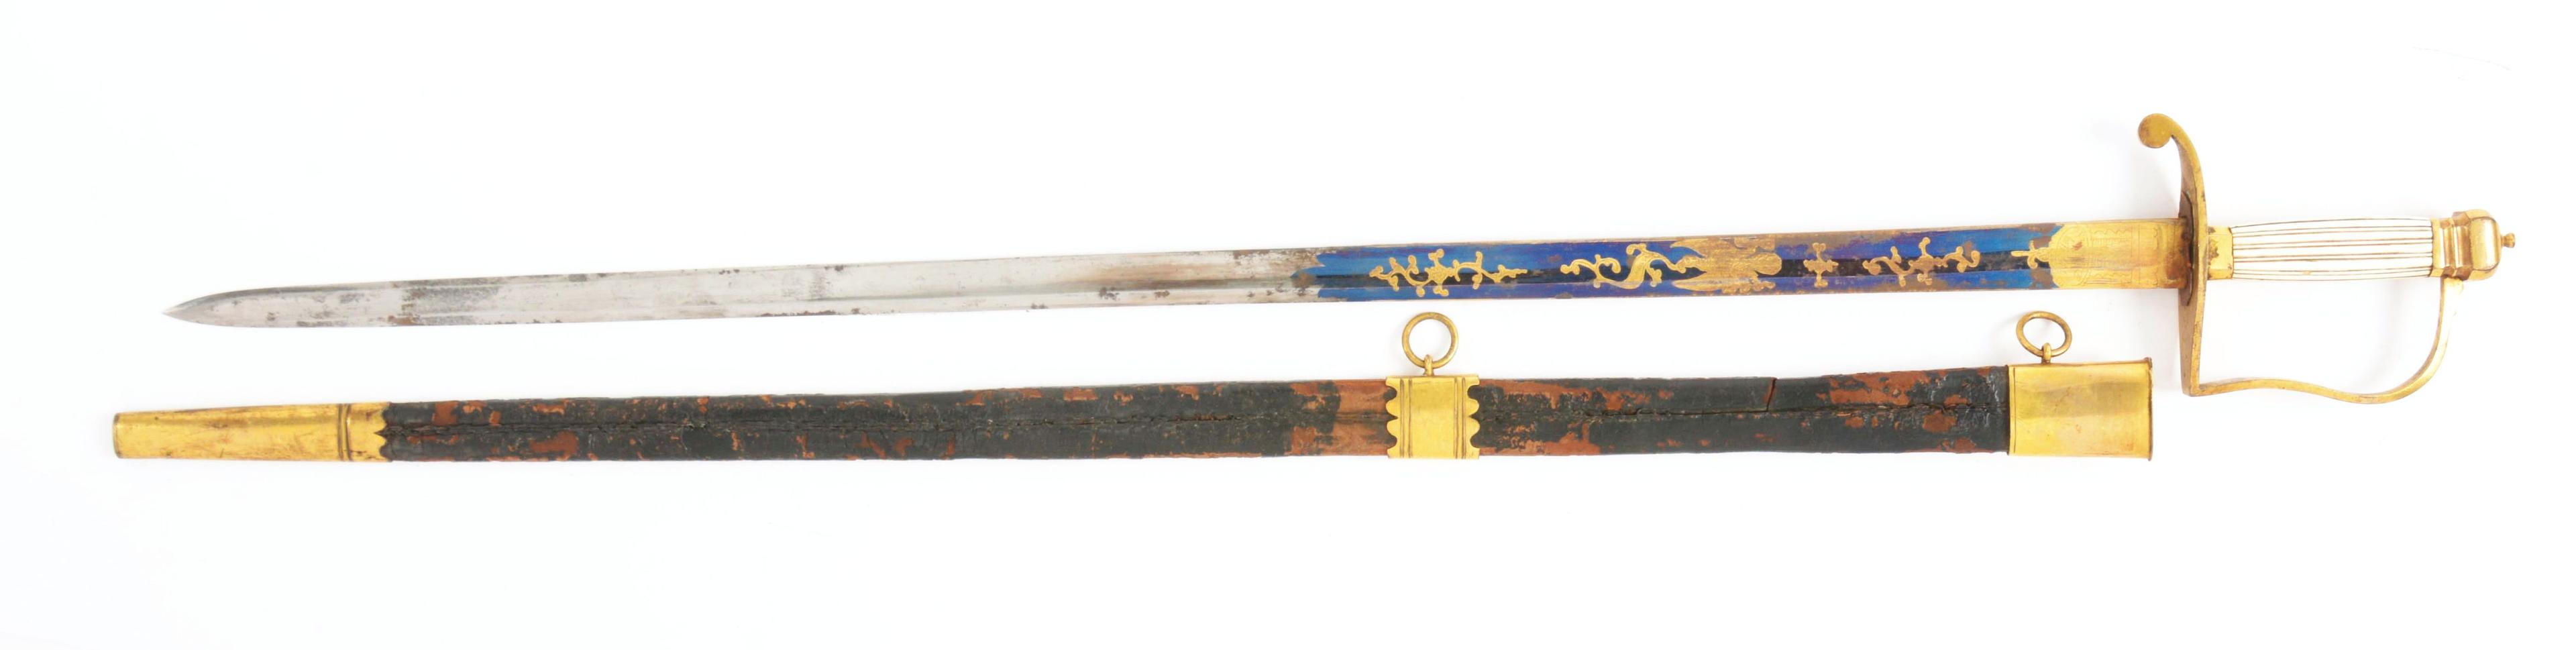 FINE GILT BRASS INFANTRY OFFICER'S SPADROON MARKED WOOLEY DEAKON WITH SCABBARD.